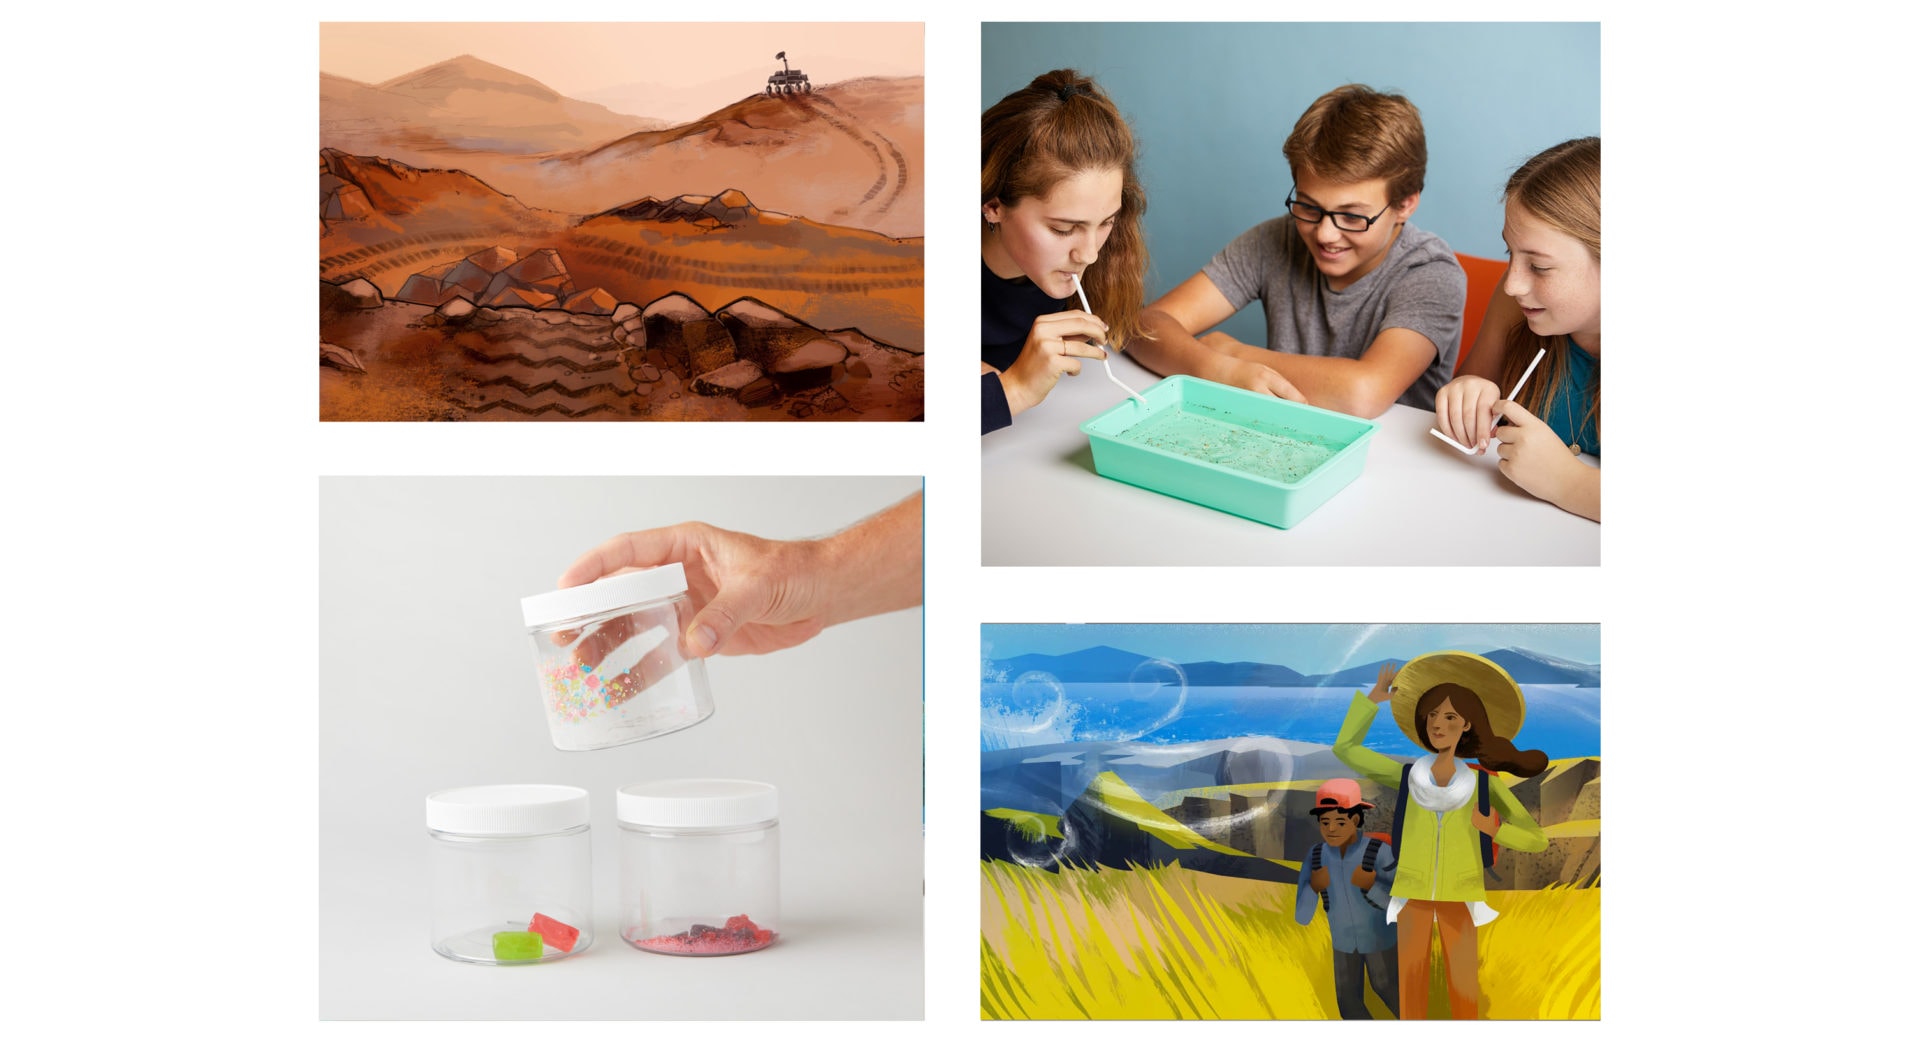 Collage of four images: a watercolor desert scene, three kids examining a gadget, a hand placing beads into a container, and a woman in a sunhat in a stylized field.